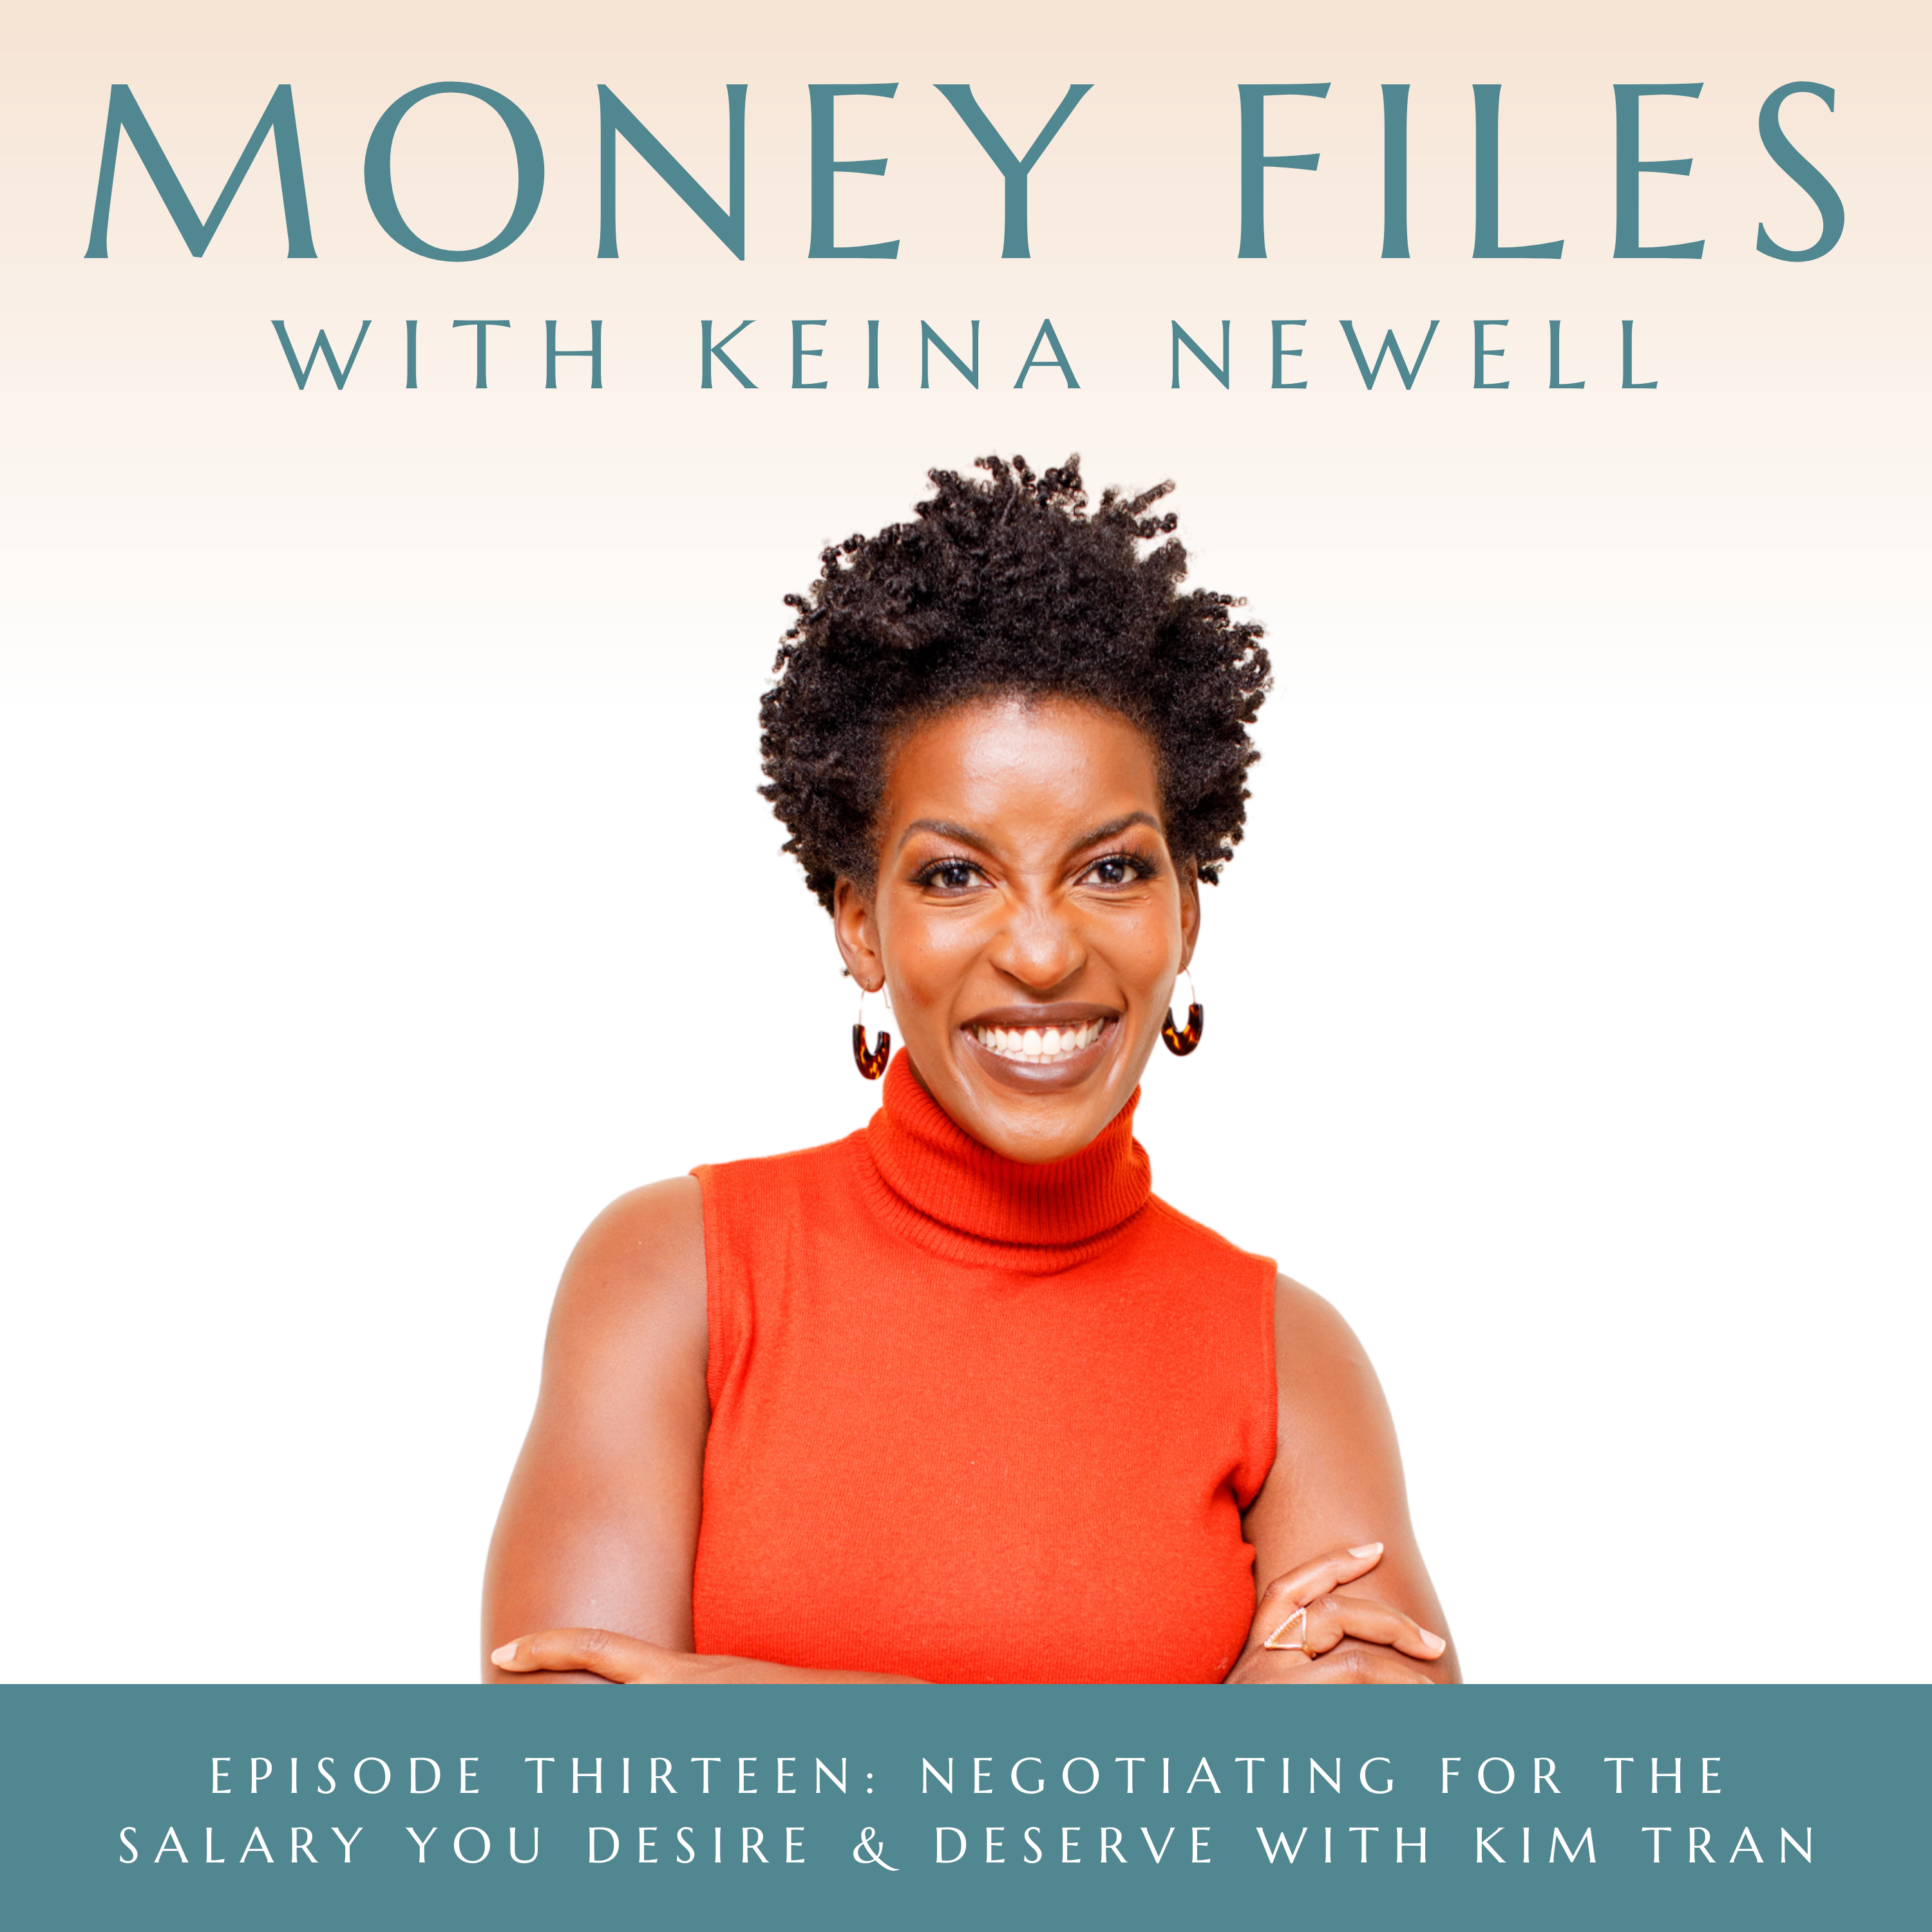 Negotiating for the Salary You Desire & Deserve with Kim Tran